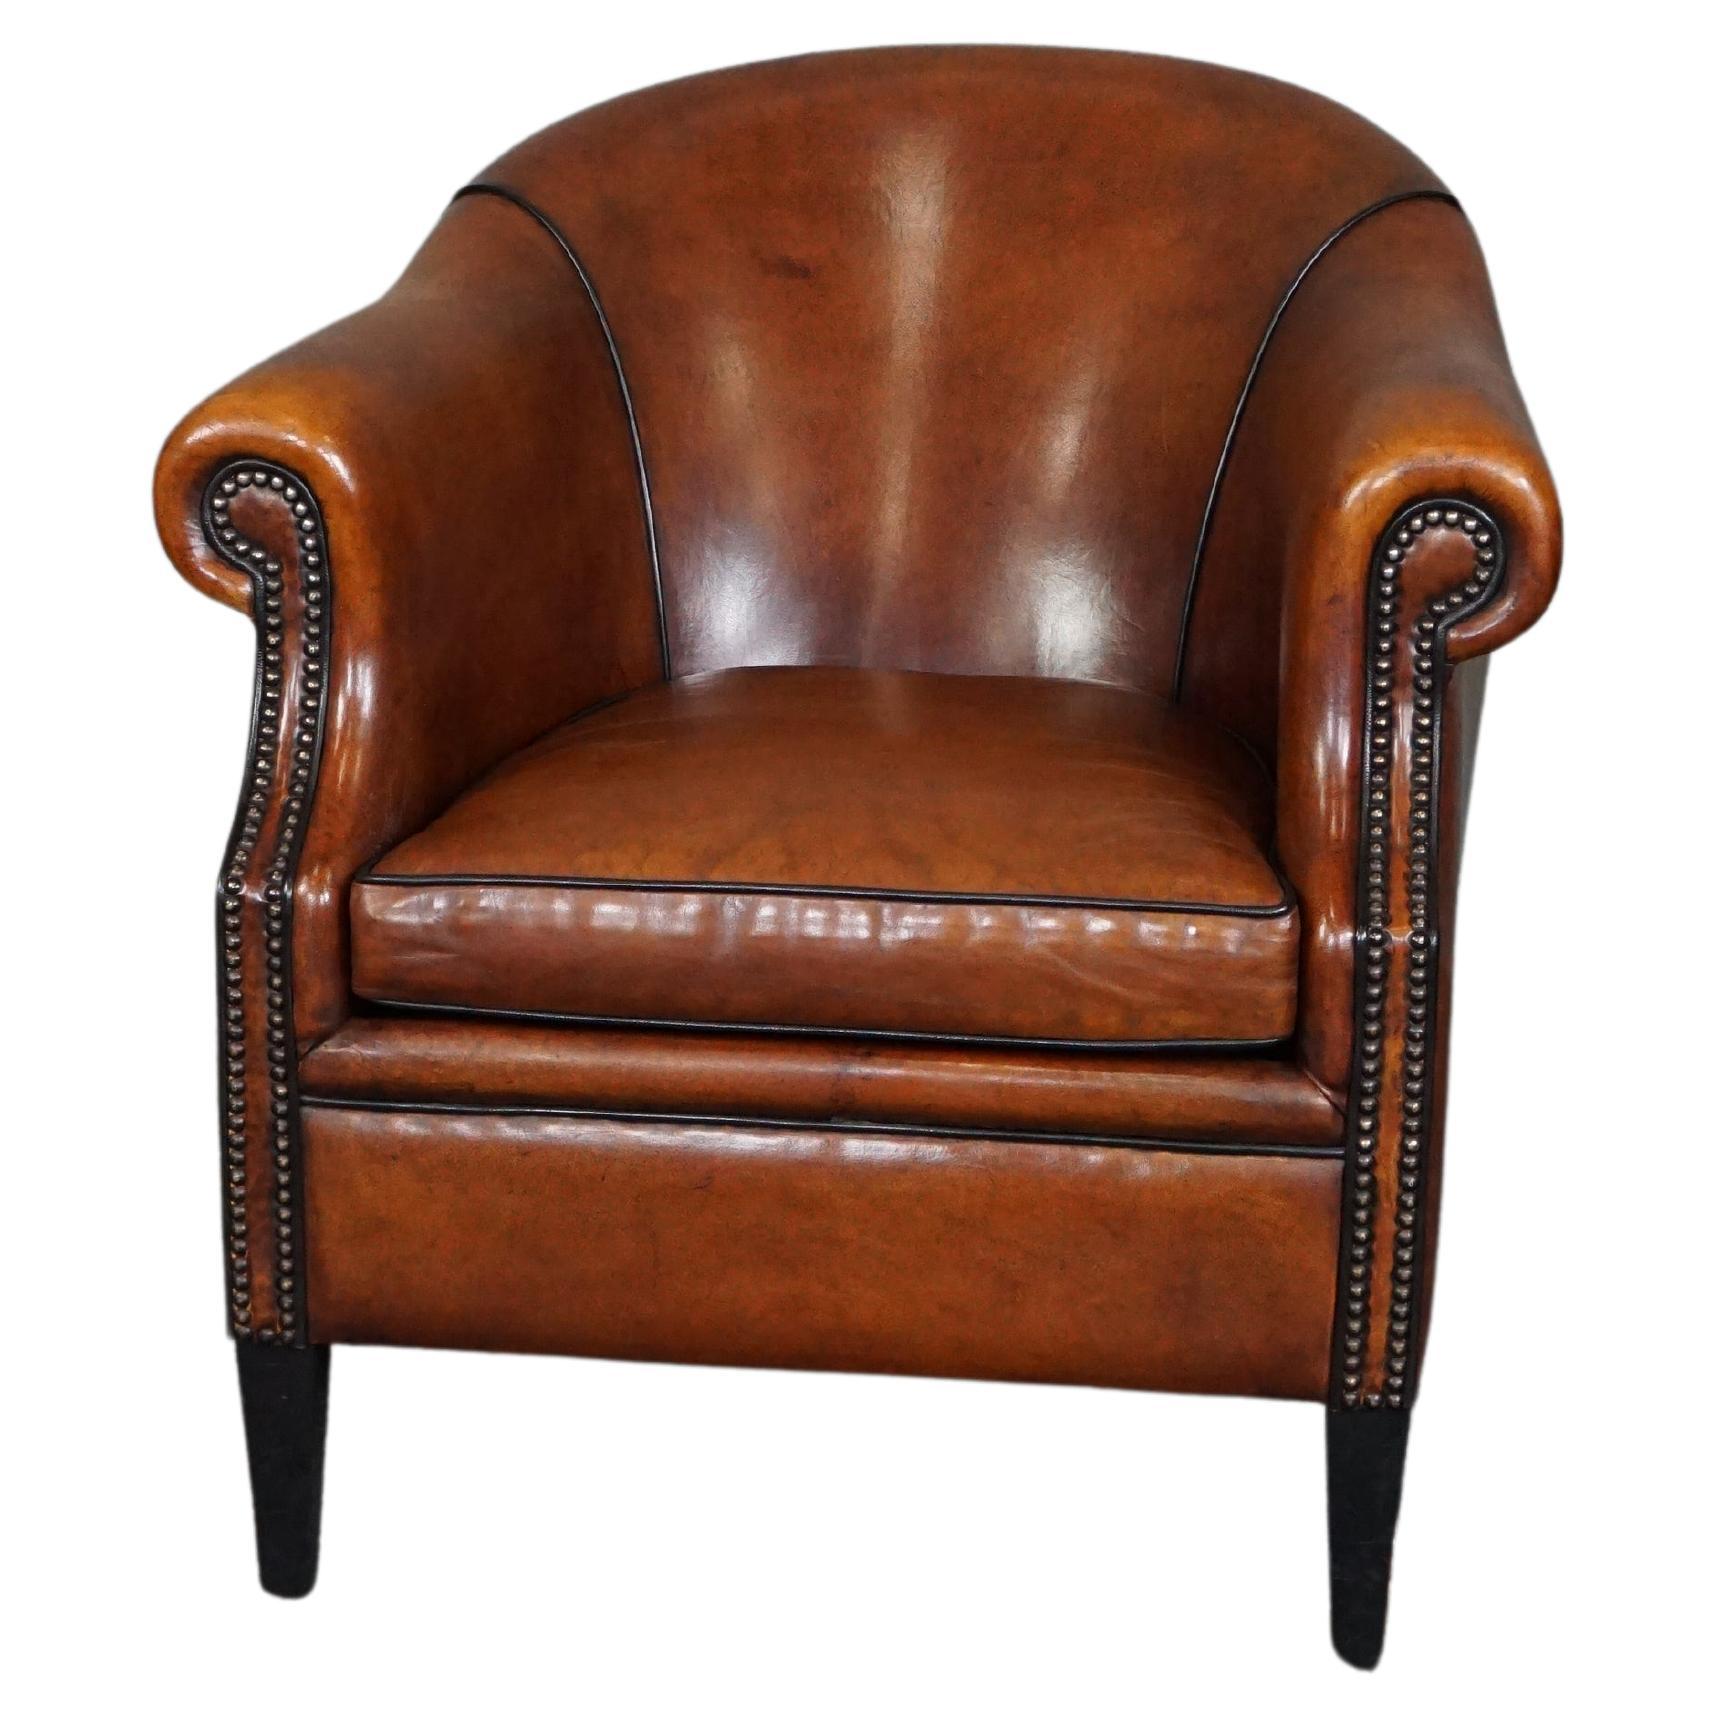 Very expressive sheep leather club chair with black piping For Sale